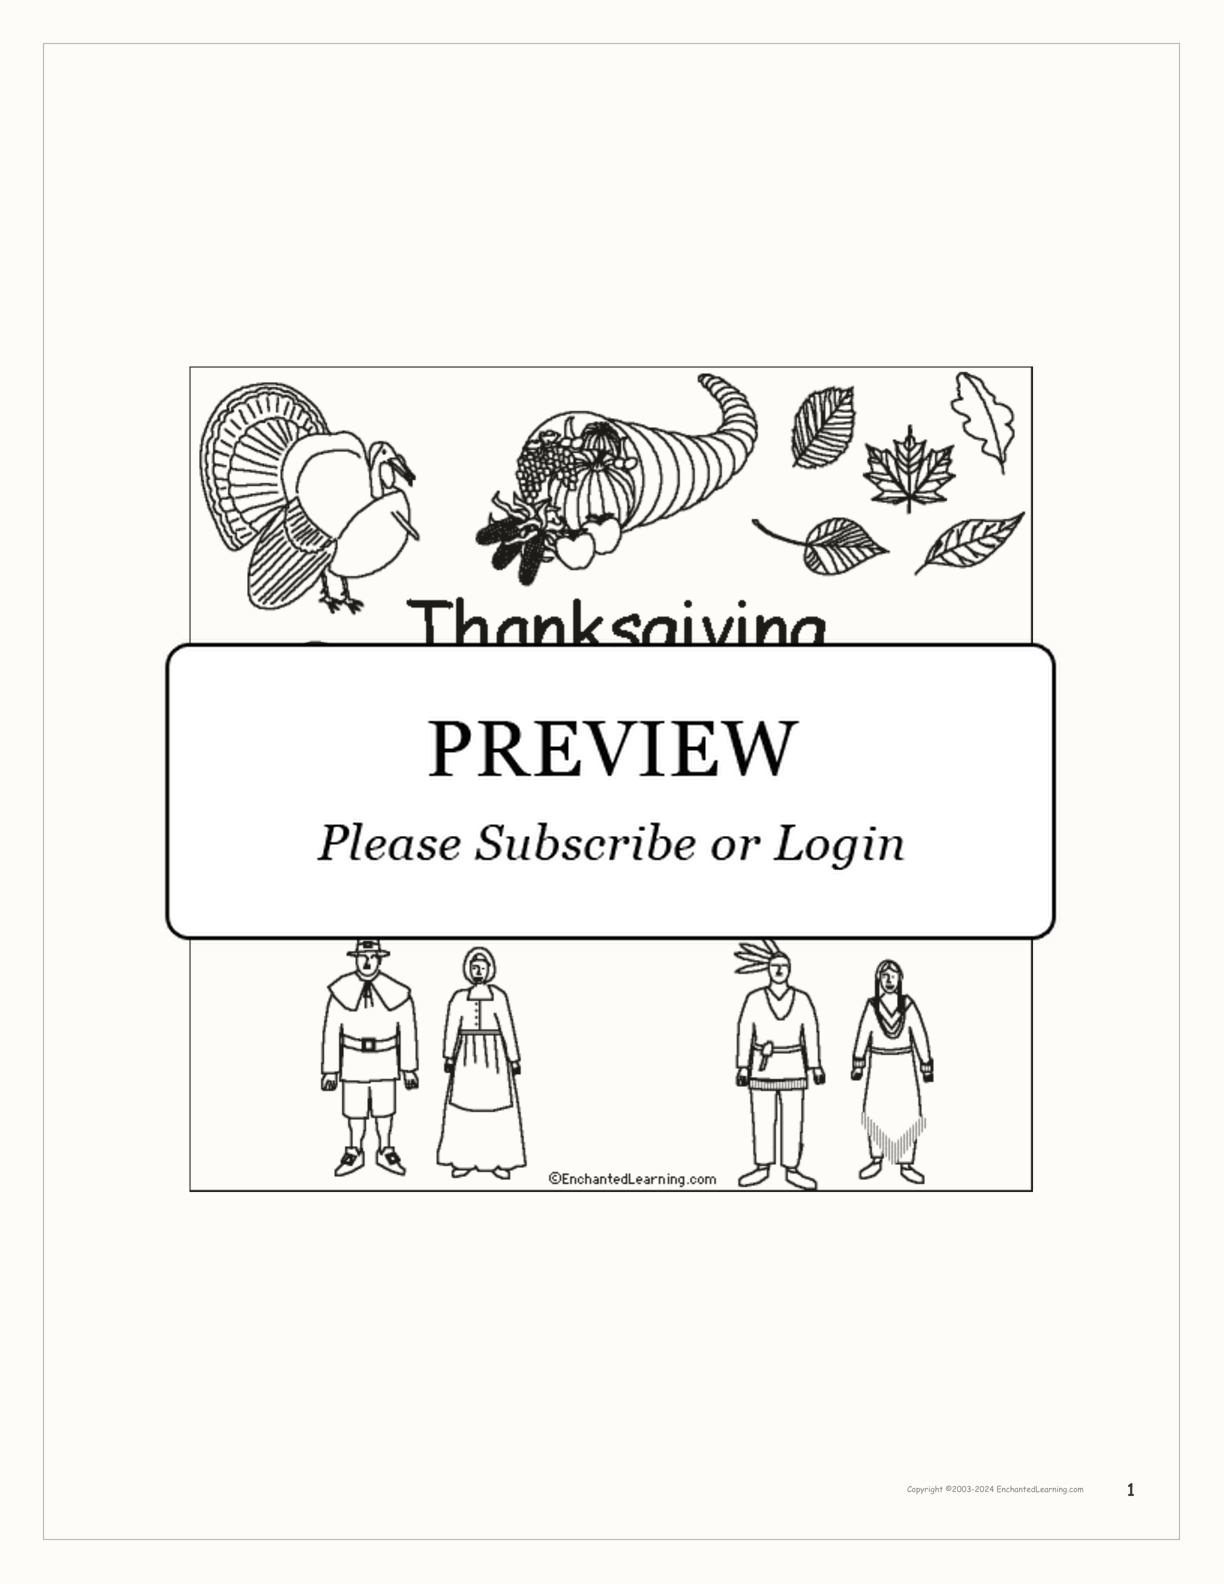 'Thanksgiving is for...' Book for Early Readers interactive printout page 1